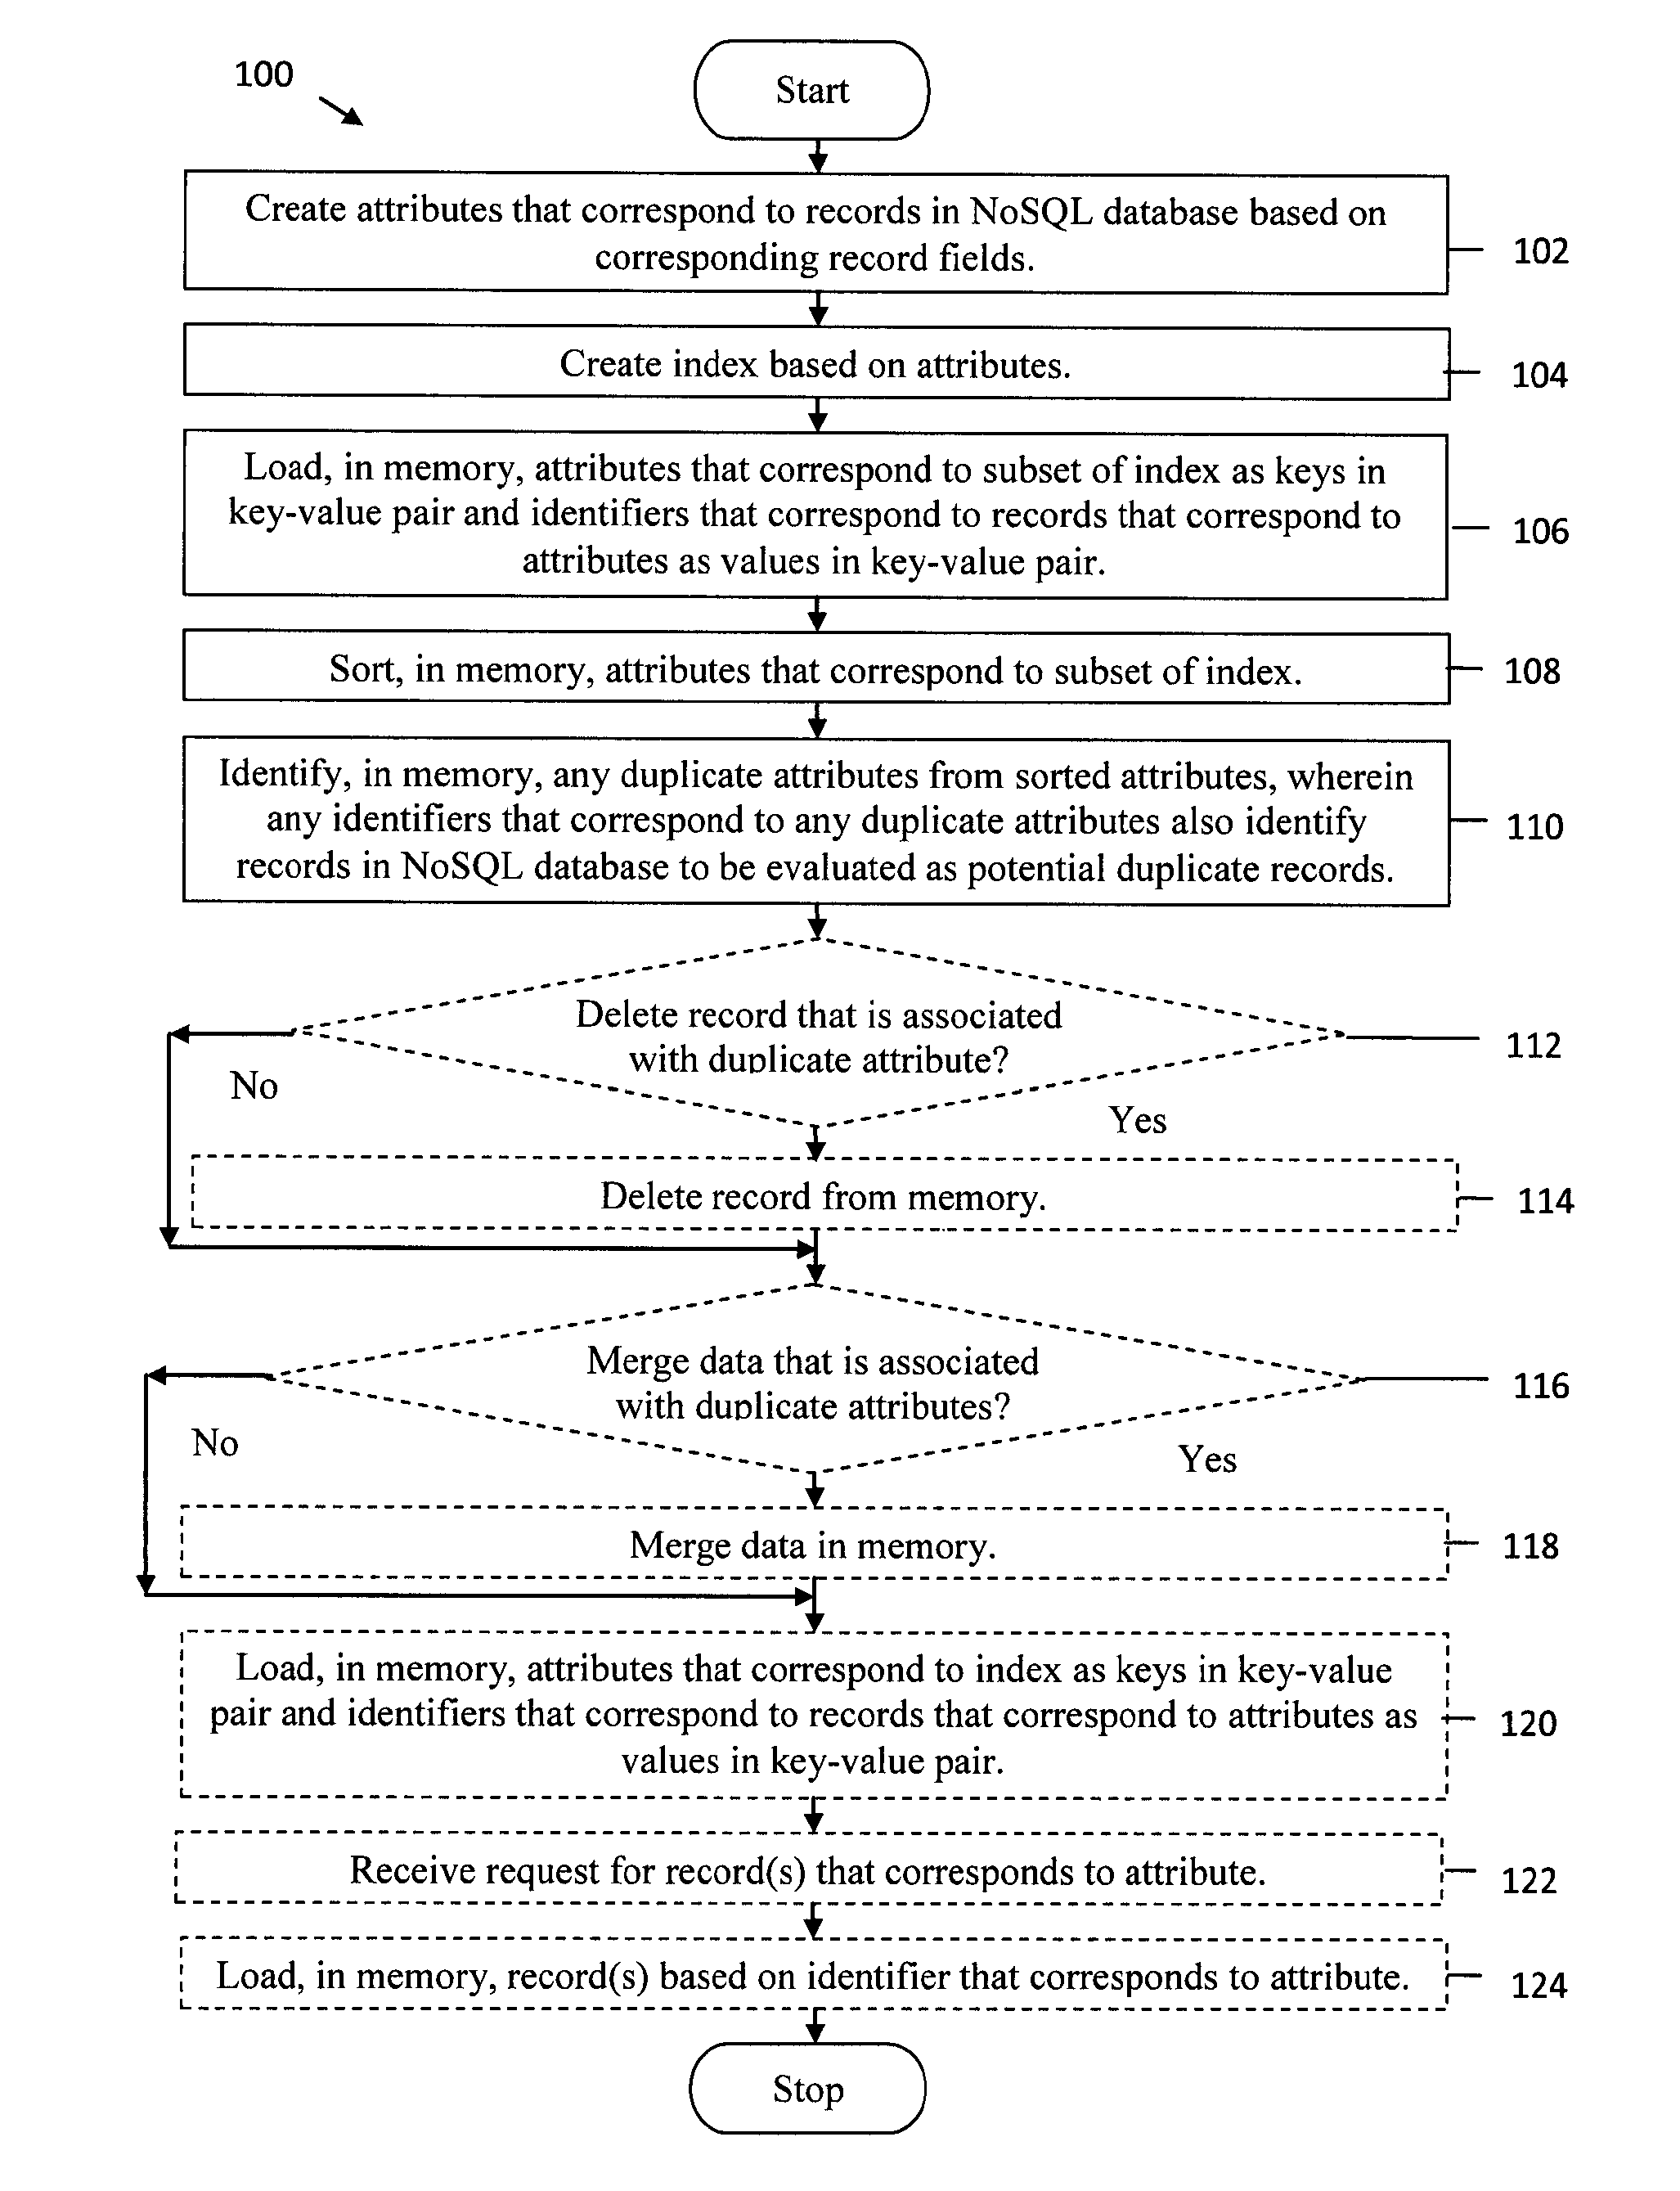 Method and system for creating indices and loading key-value pairs for nosql databases